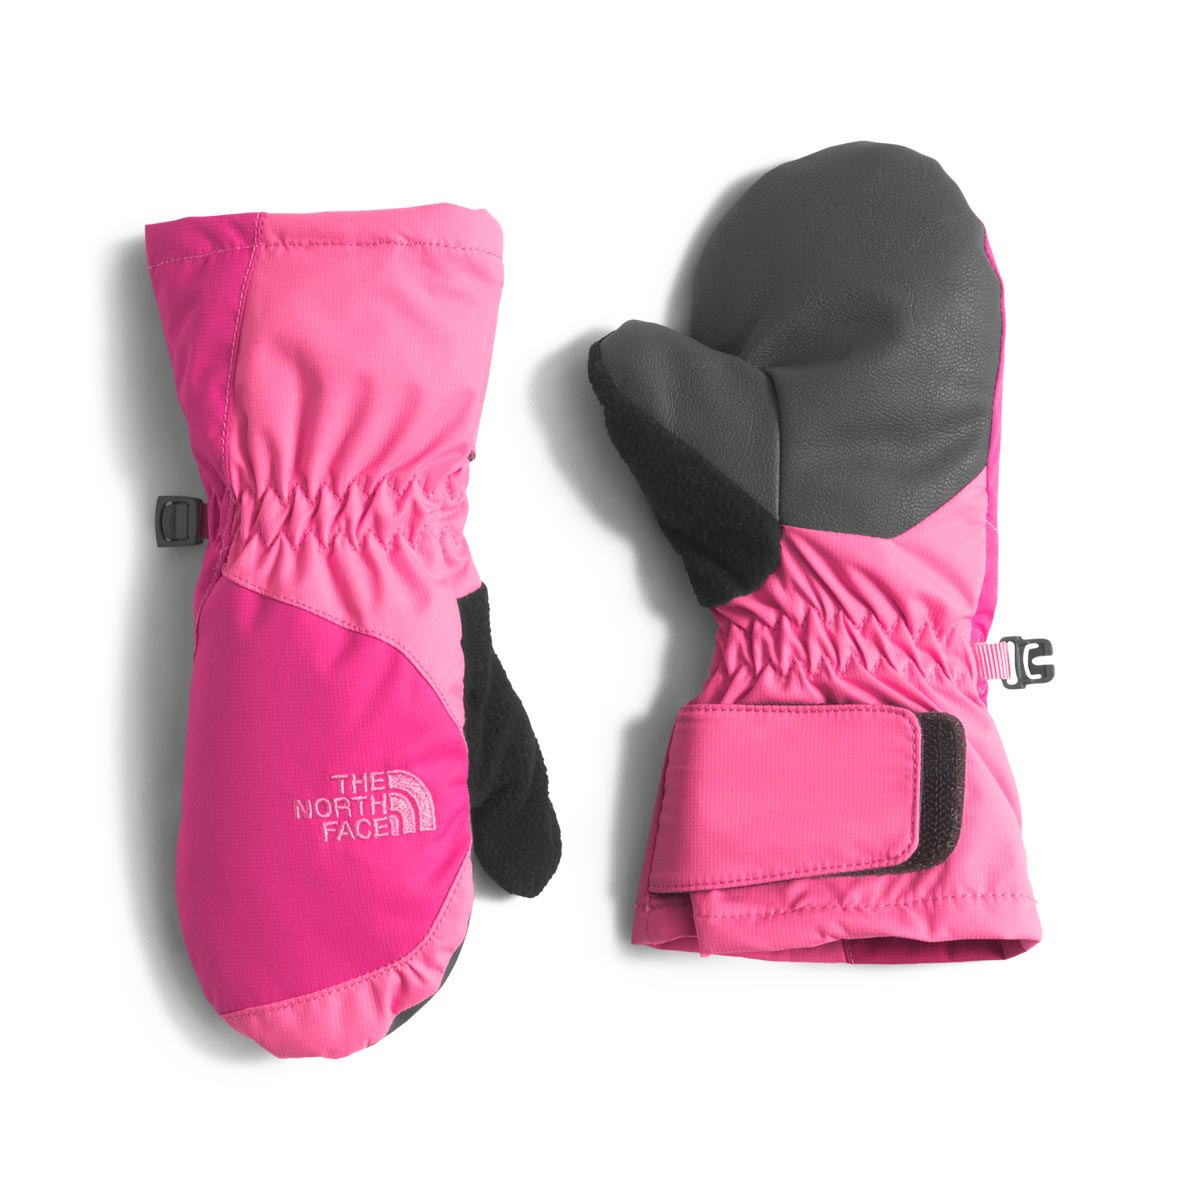 The North Face Toddlers Mitt